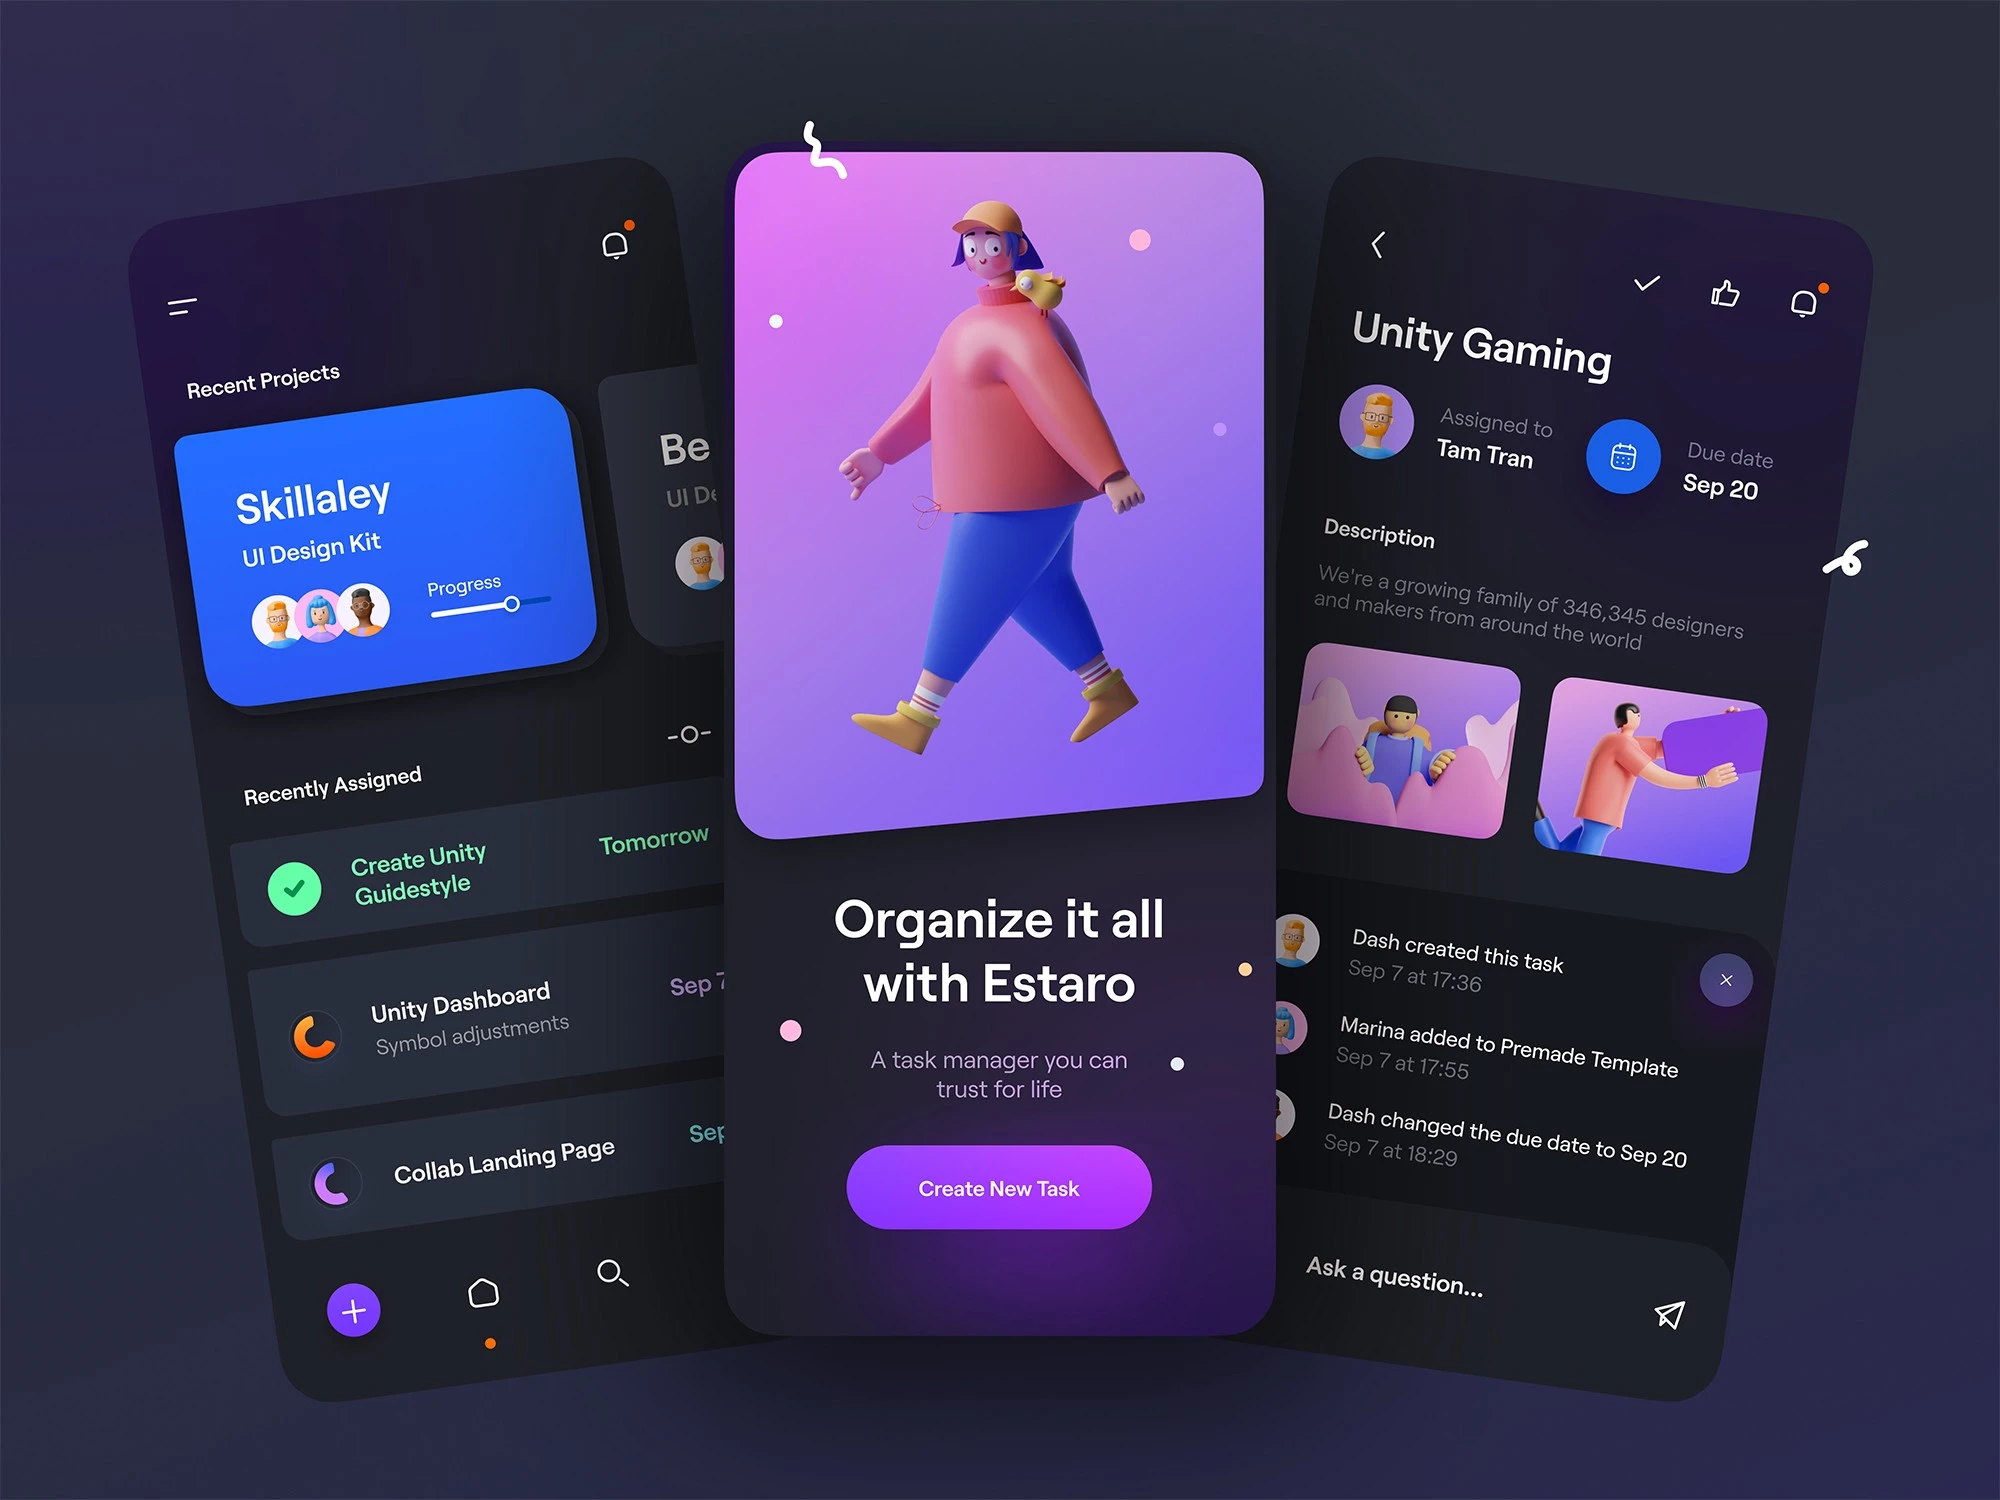 Dribbble post from UI8 account